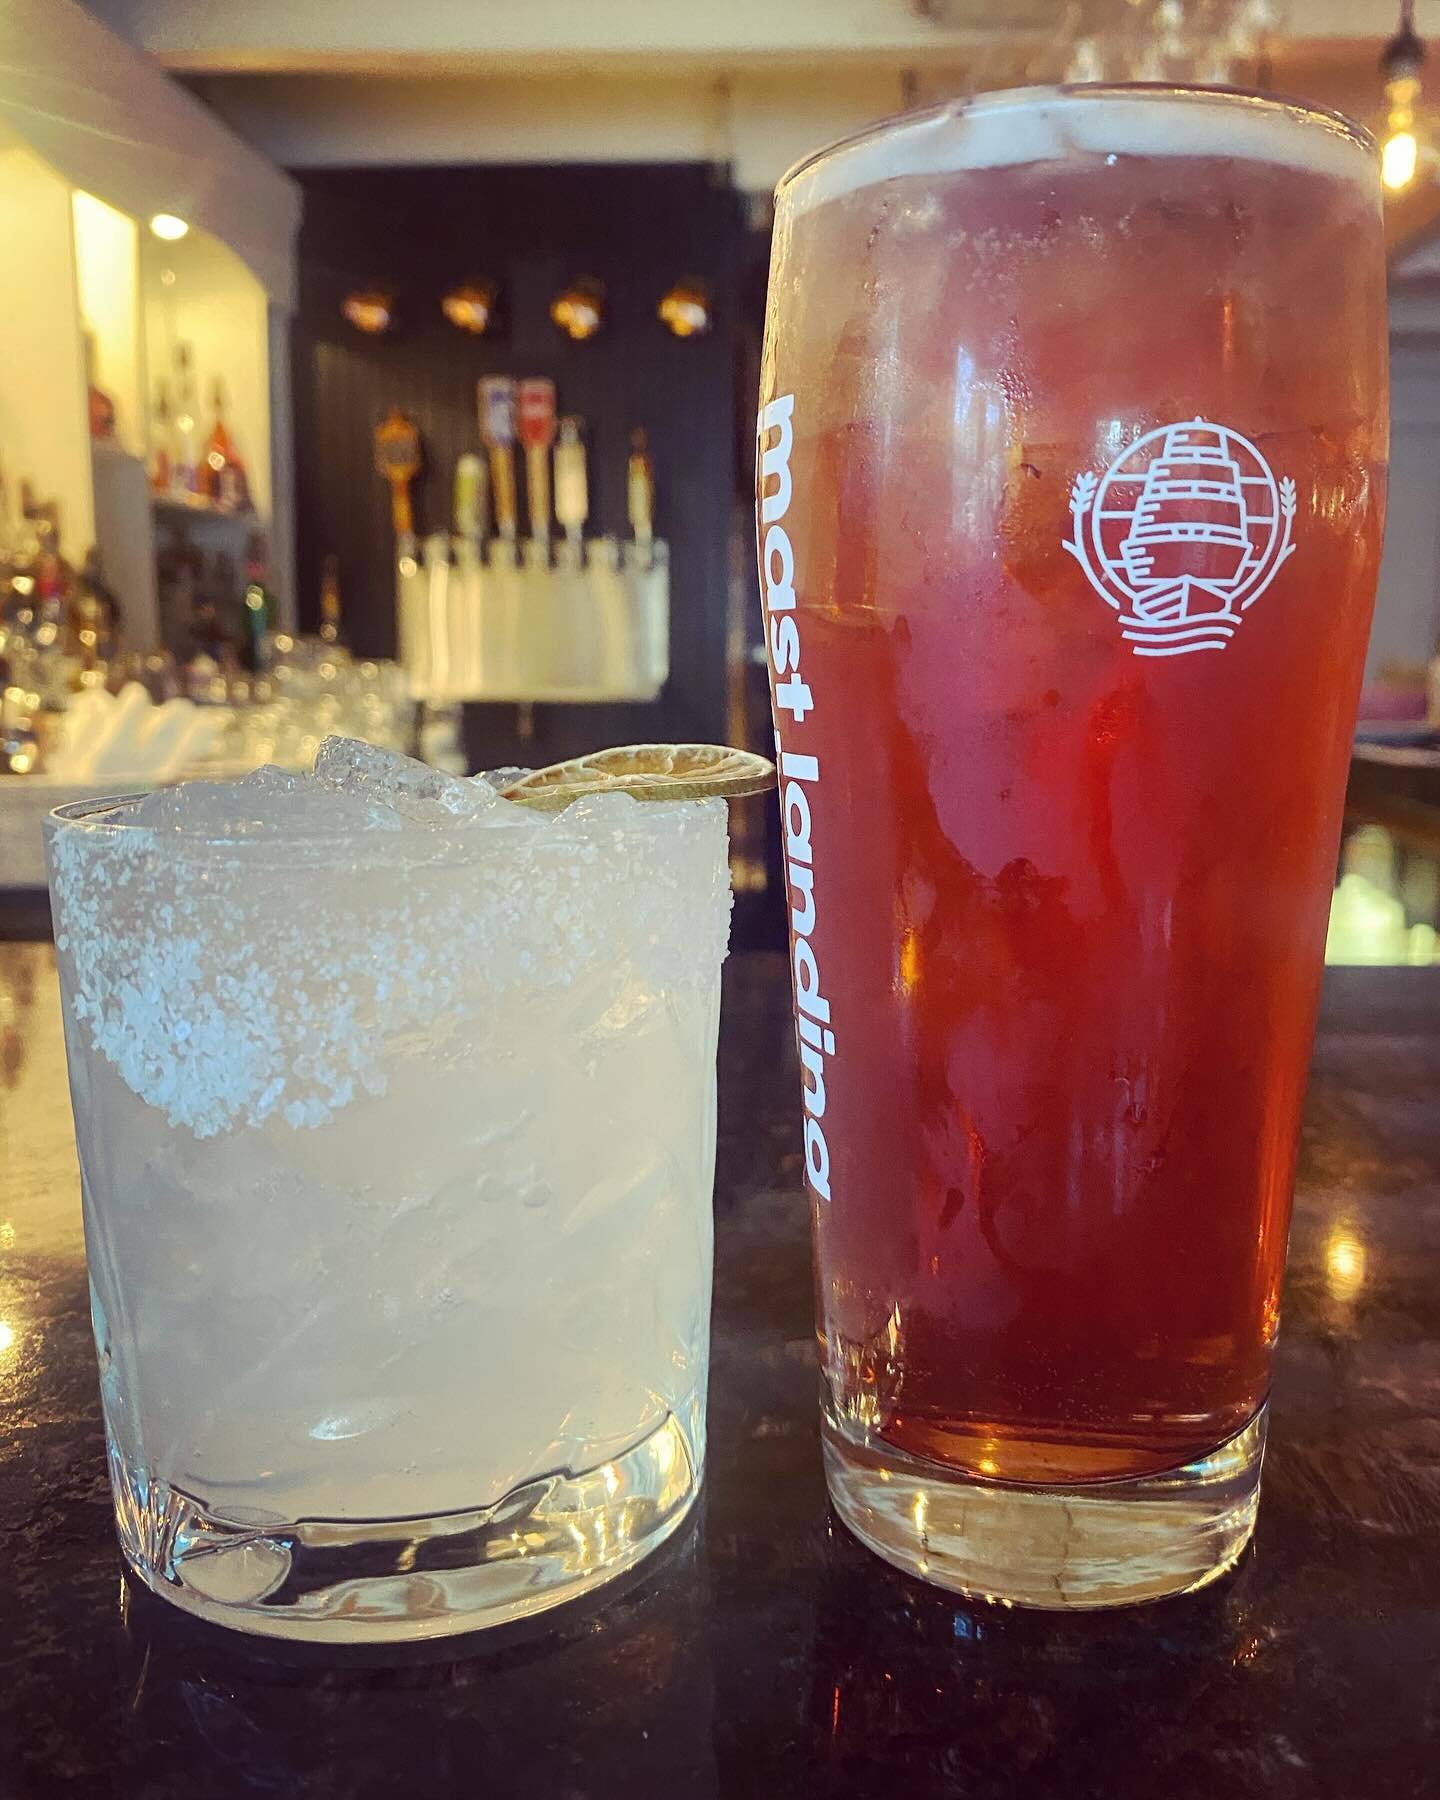 It is getting warm!
It is time for a cold beverage!
Join us for happy hour 5:00-6:00 at the Bar!
#freshcamden 
#happyhour 
#camdenmaine 
#itsgettinghot 
#relax